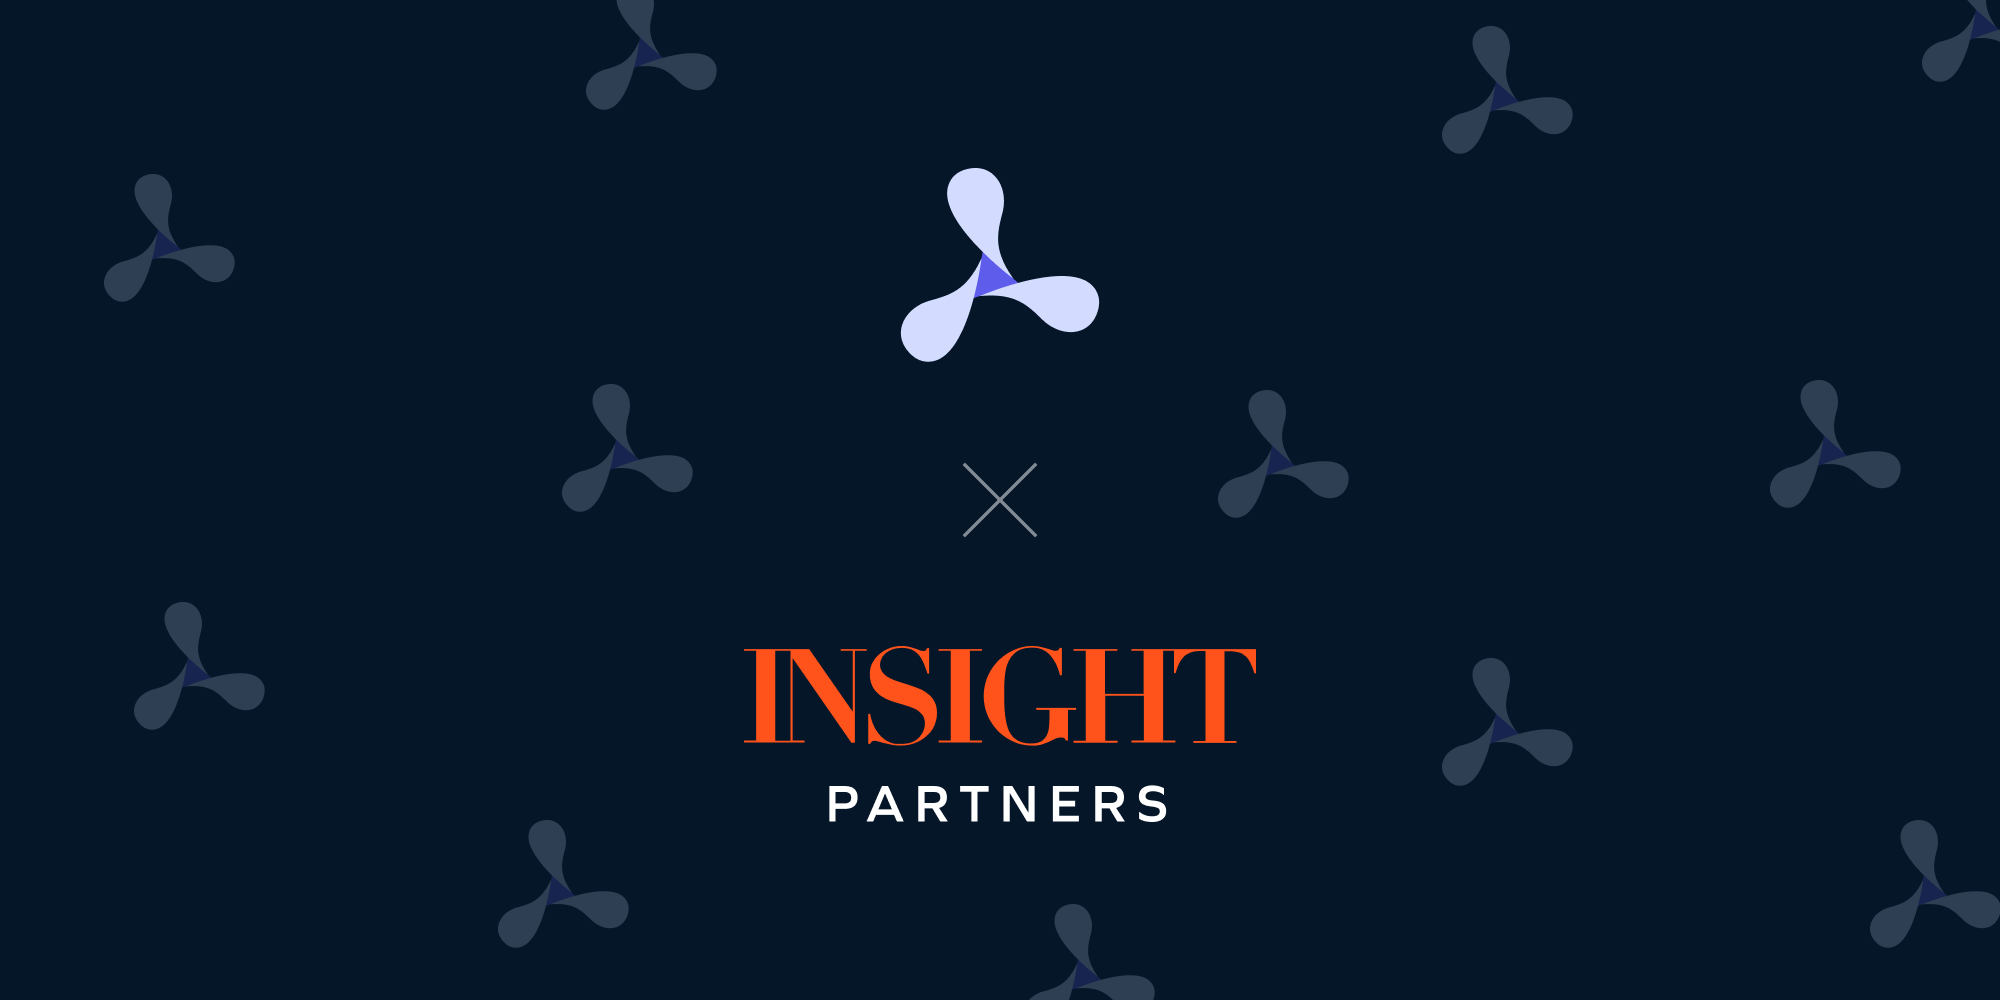 Illustration: PSPDFKit Announces €100 Million Strategic Investment From Insight Partners to Fuel Growth